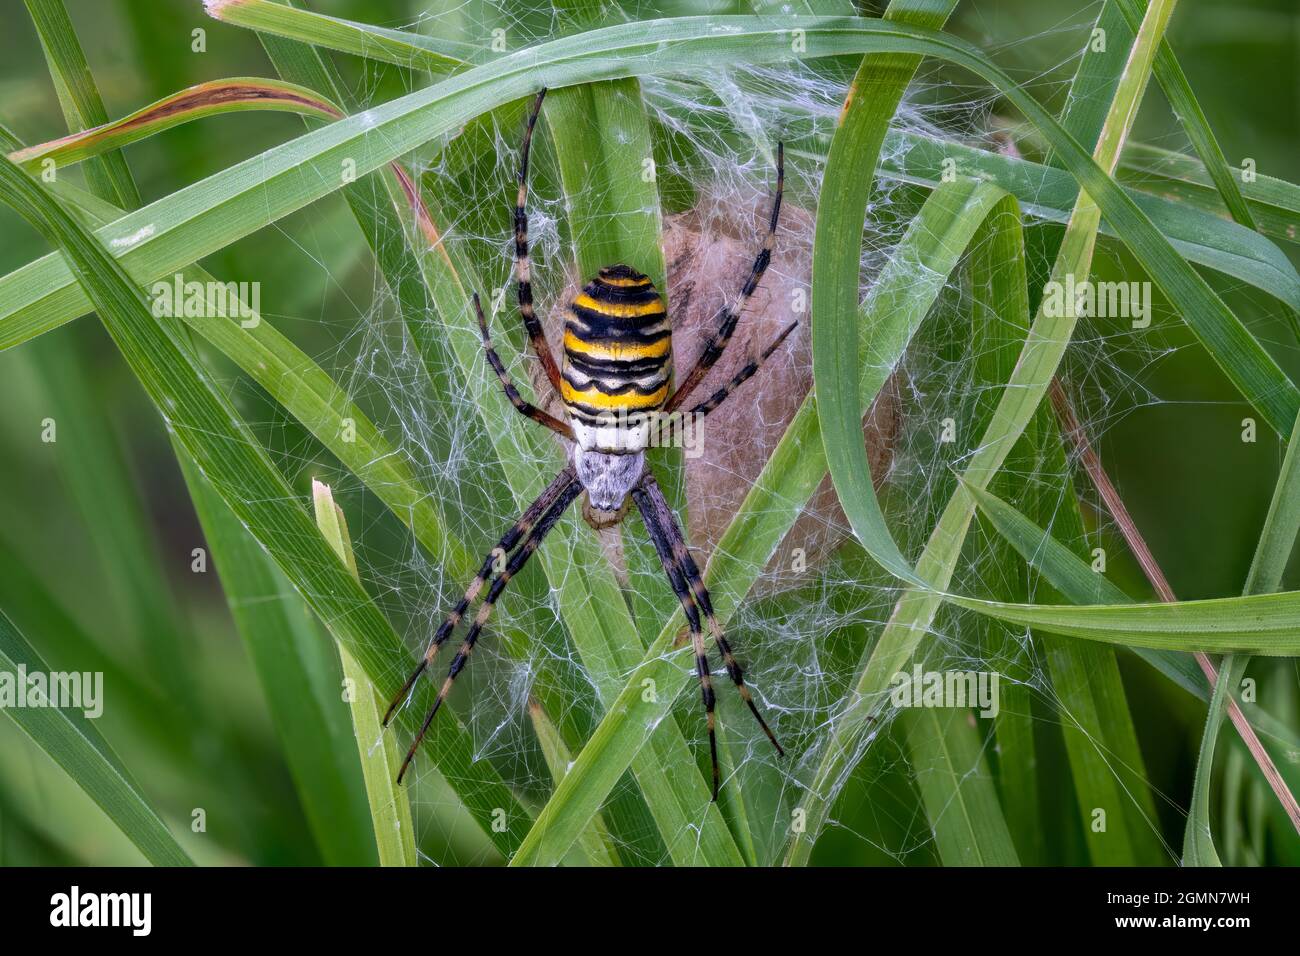 A Argiope bruennichi wasp spider defending its cocooned eggs on a green meadow in Germany. Stock Photo